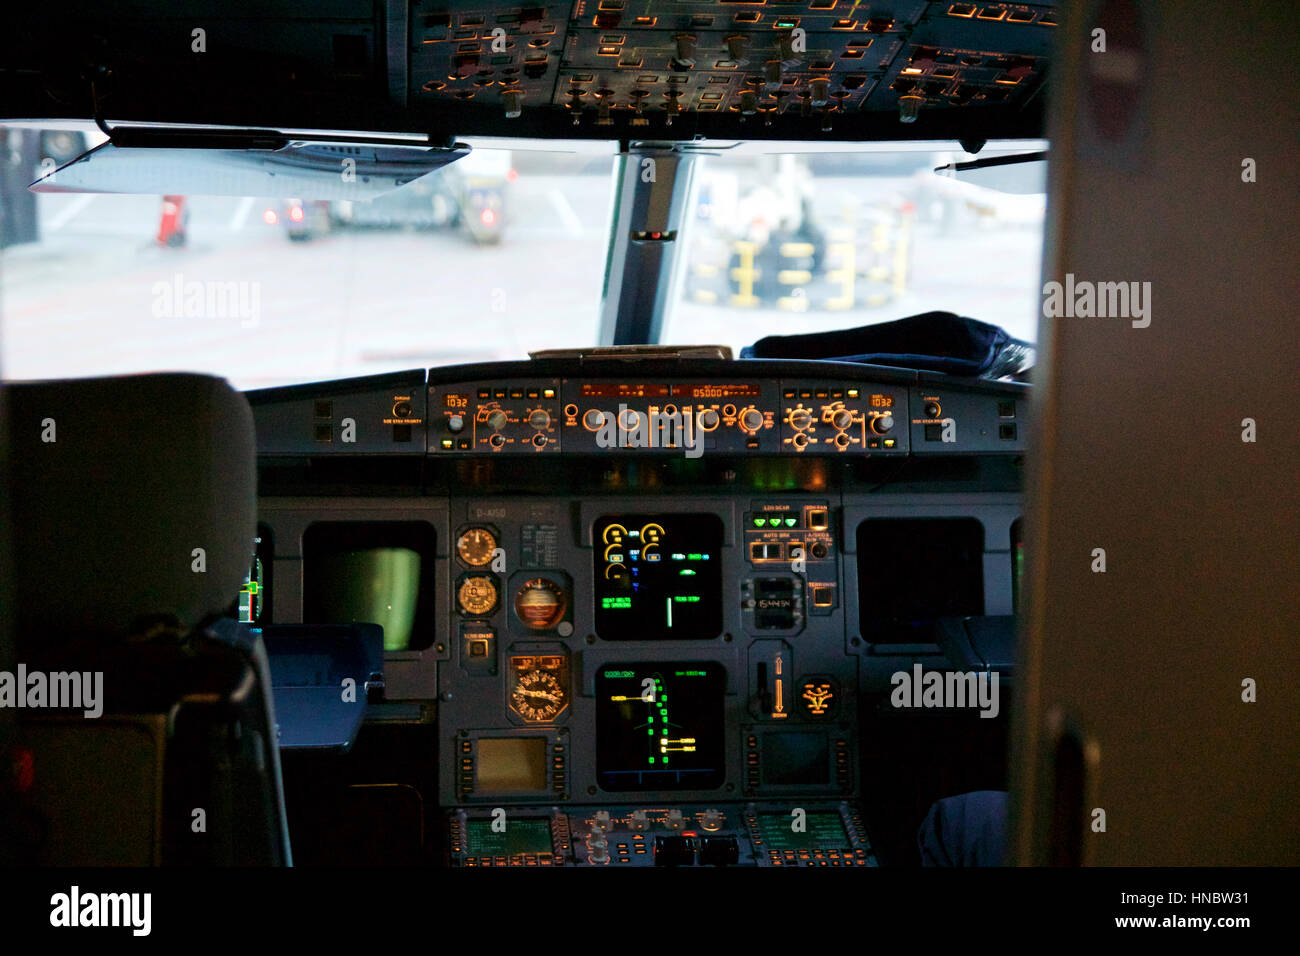 FRANKFURT, GERMANY - JAN 20th, 2017: Airbus A320 cockpit interior. The Airbus A320 family consists of short- to medium-range, narrow-body, commercial  Stock Photo